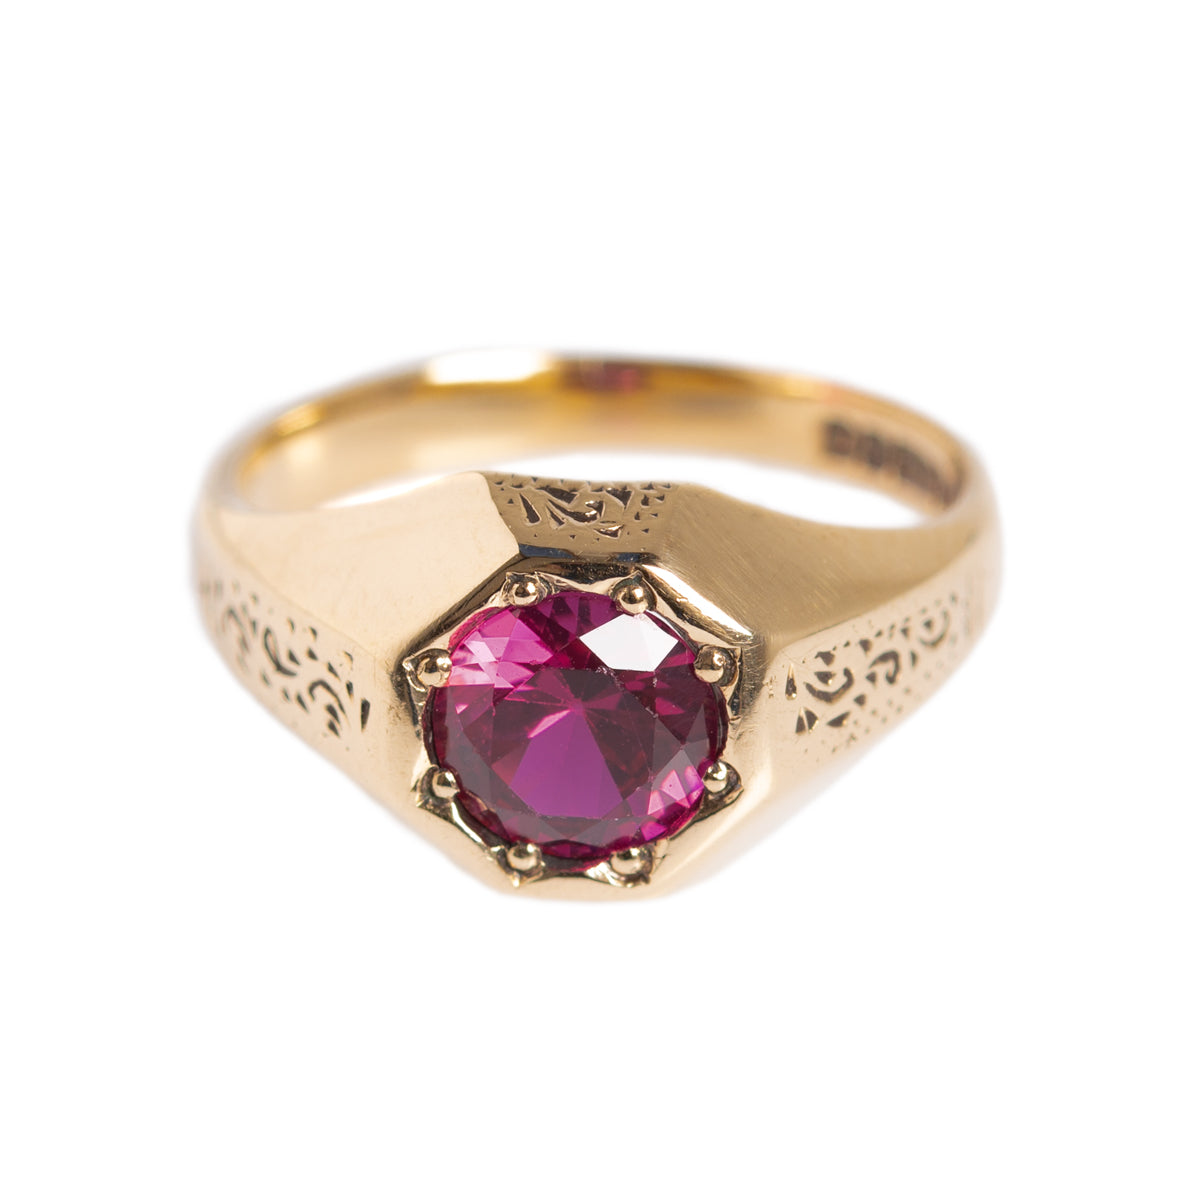 1ct Ruby Gemstone Gold Ring Vintage Estate Jewellery 9ct Gold  (A1382)